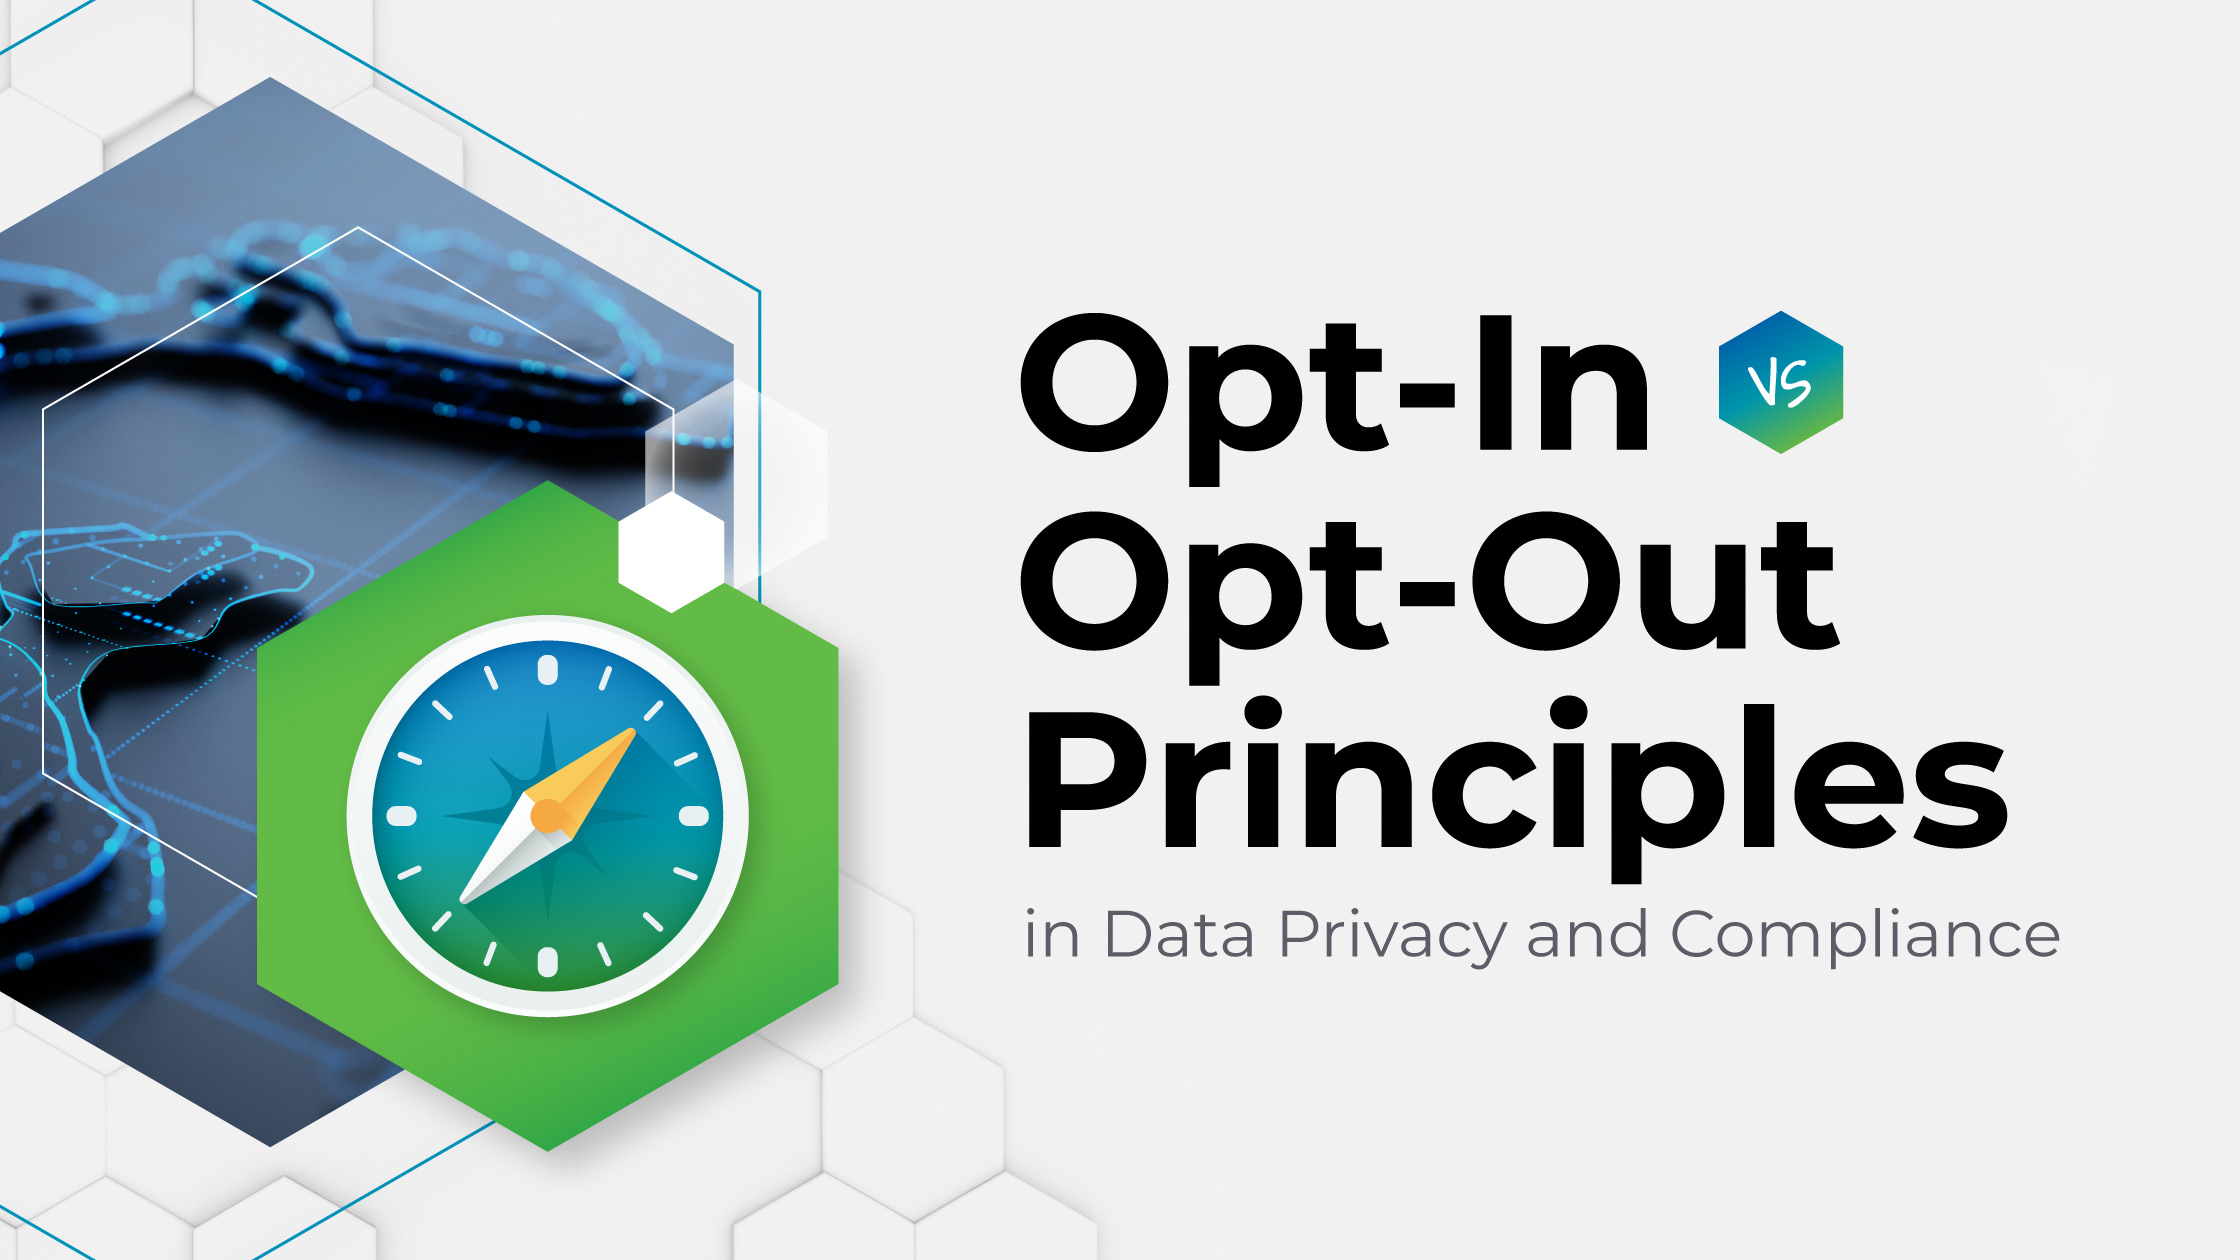 Opt-In vs Opt-Out Principles in Data Privacy and Compliance